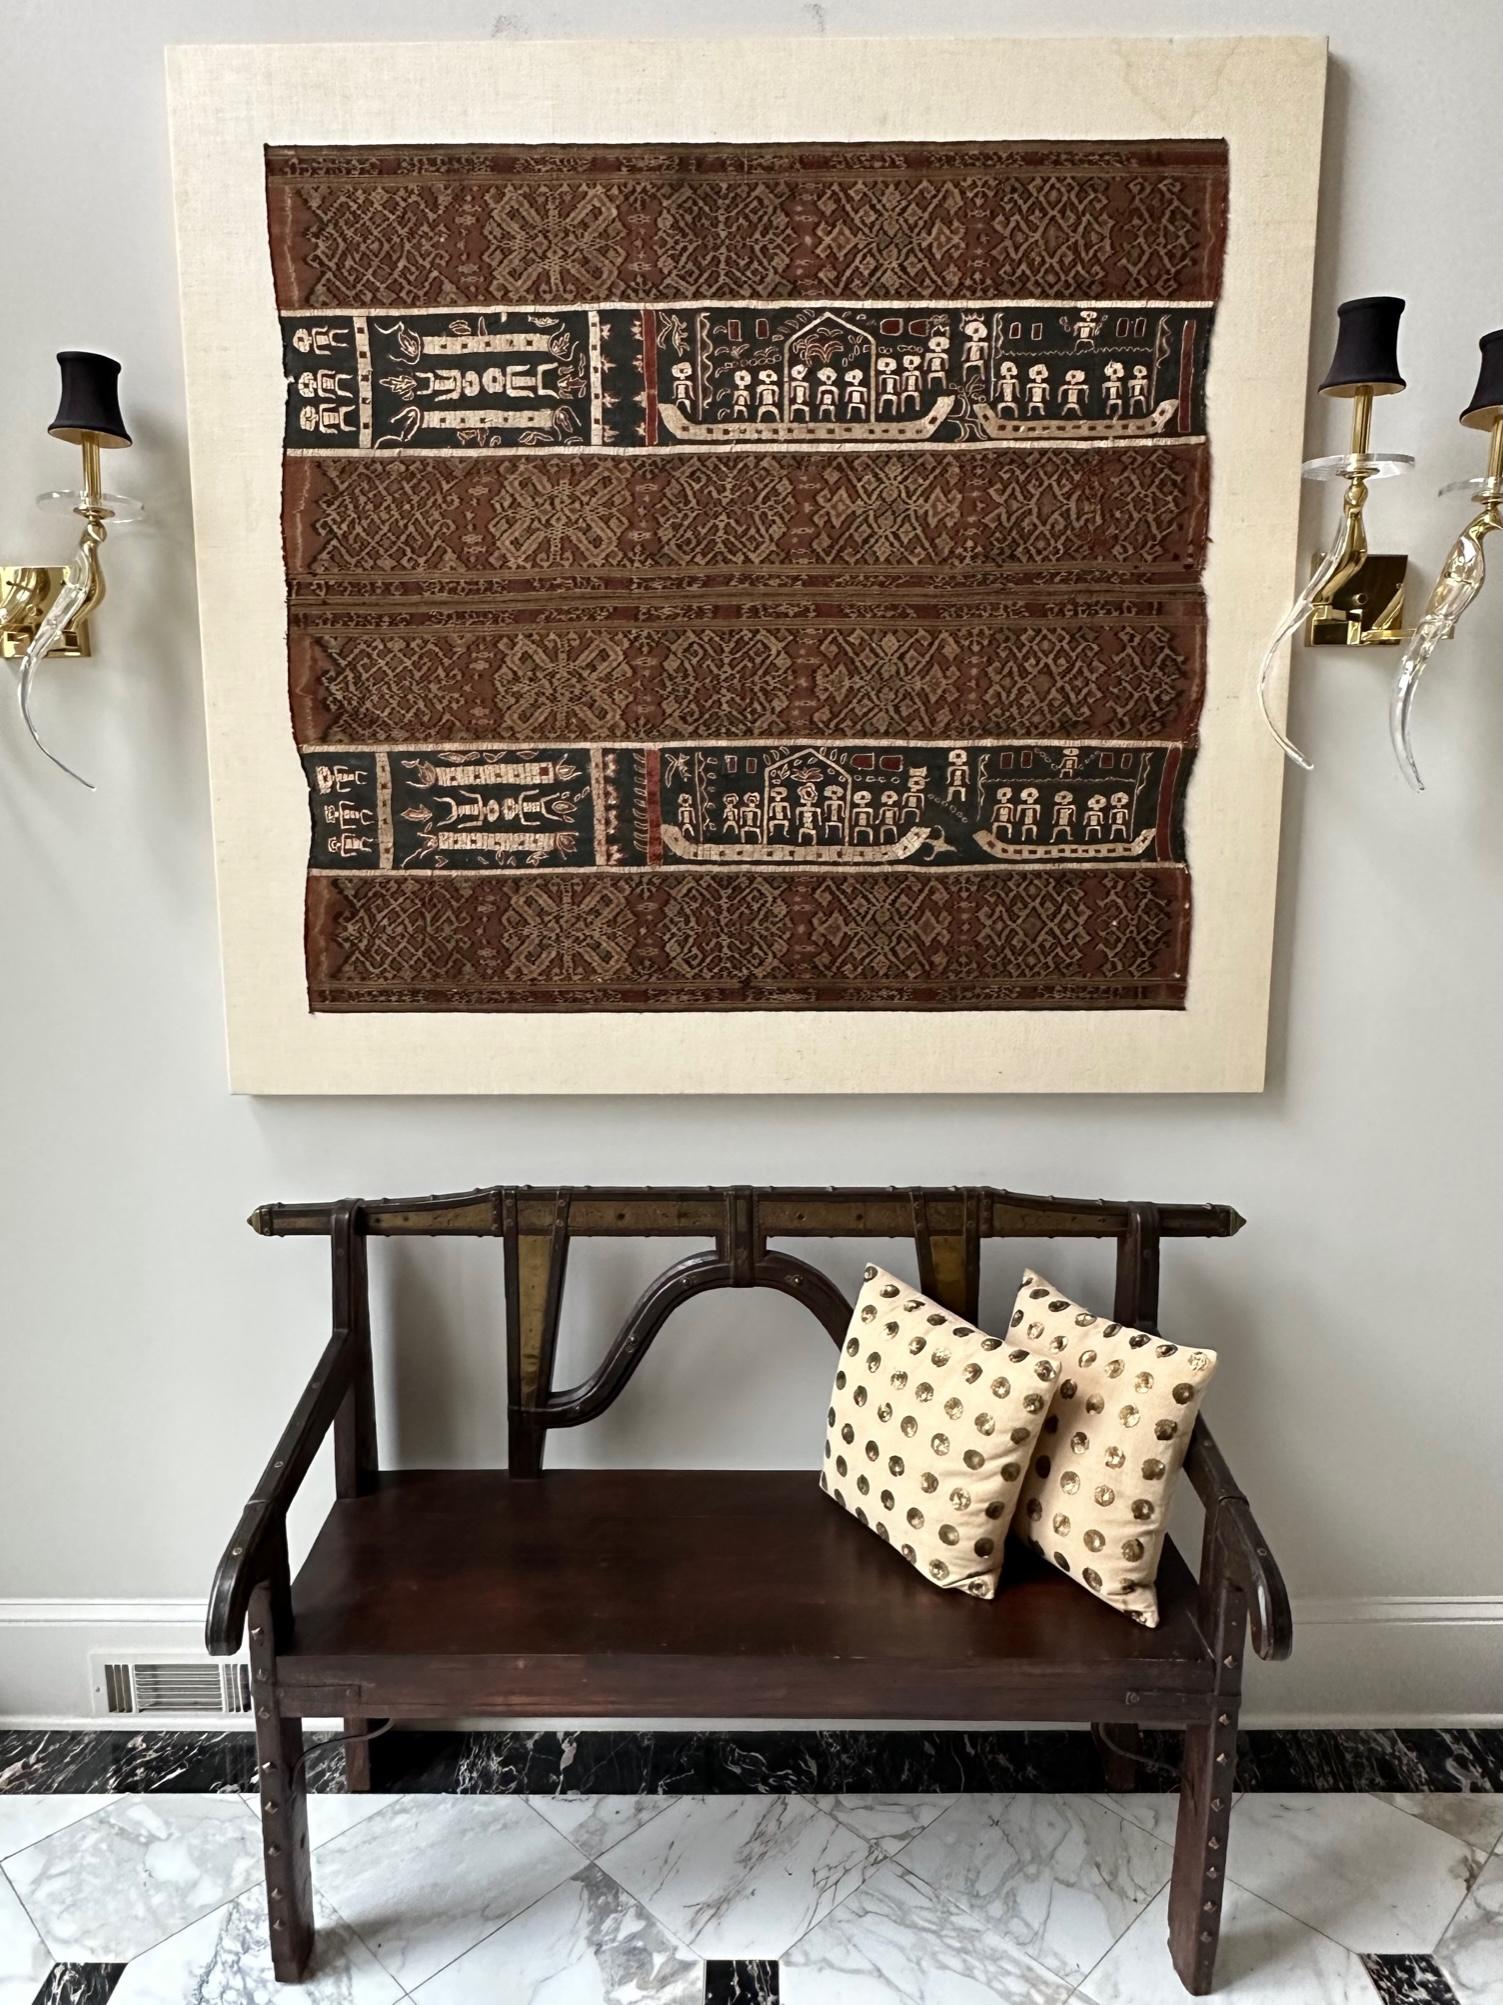  An Indonesia textile panel professionally presented on a linen canvas. It can be taken off from the canvas for easy and economical shipping upon request. The textile was joined with old woven ikat panels and apparently newer embroidery panels in